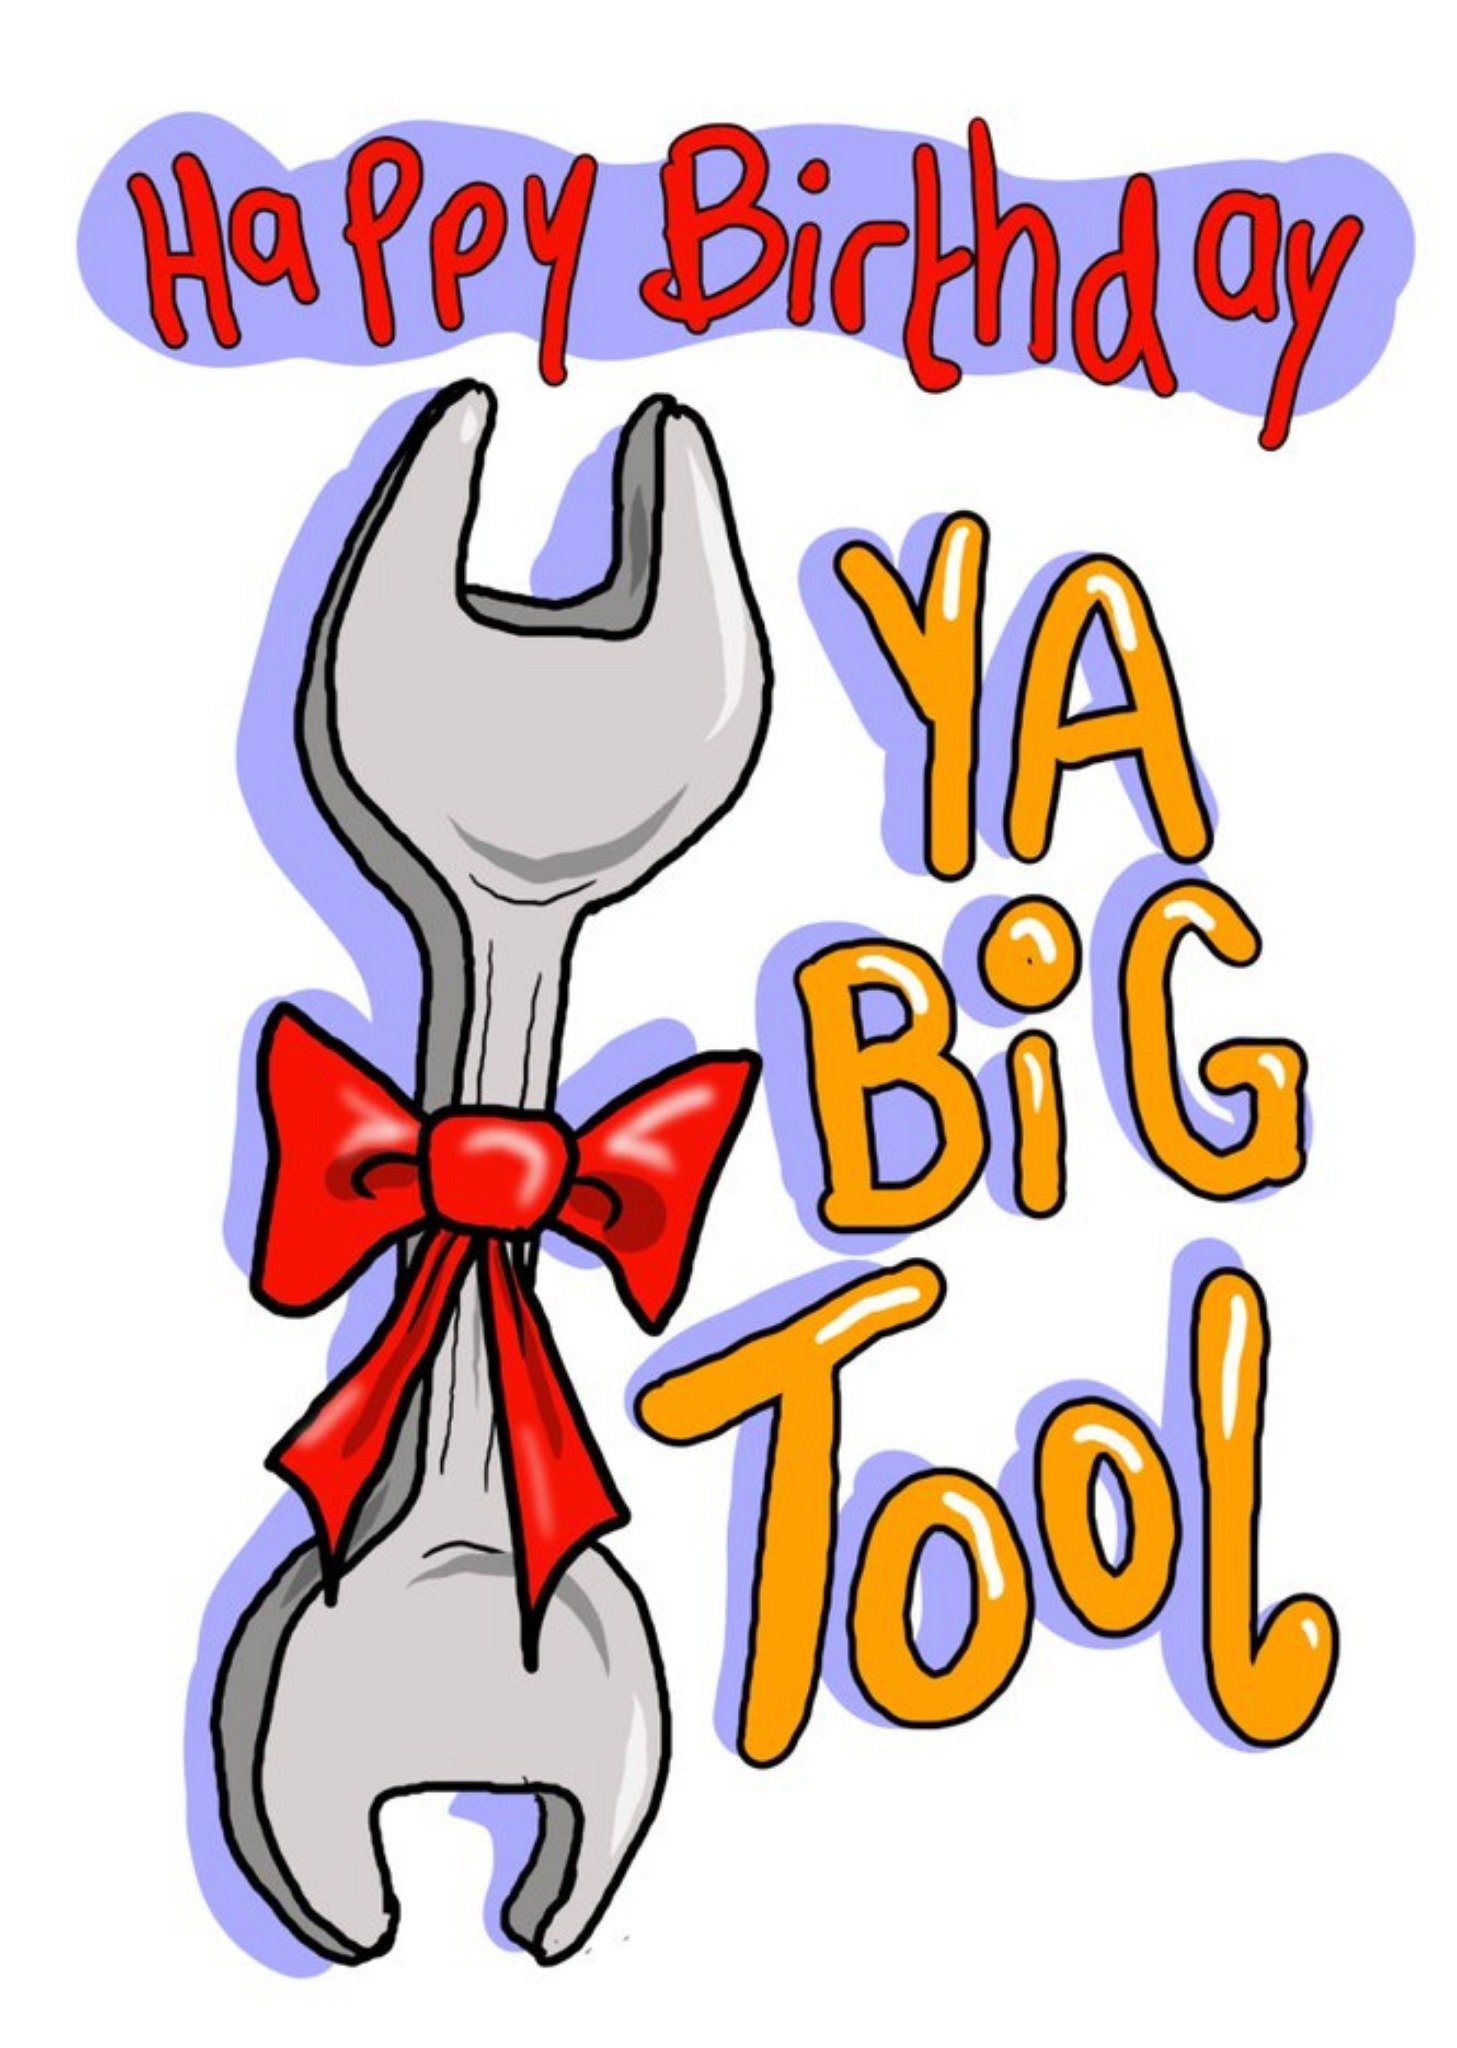 Moonpig Illustration Of A Spanner With A Bow Tie And Vibrant Typography Funny Pun Ya Big Tool Birthd